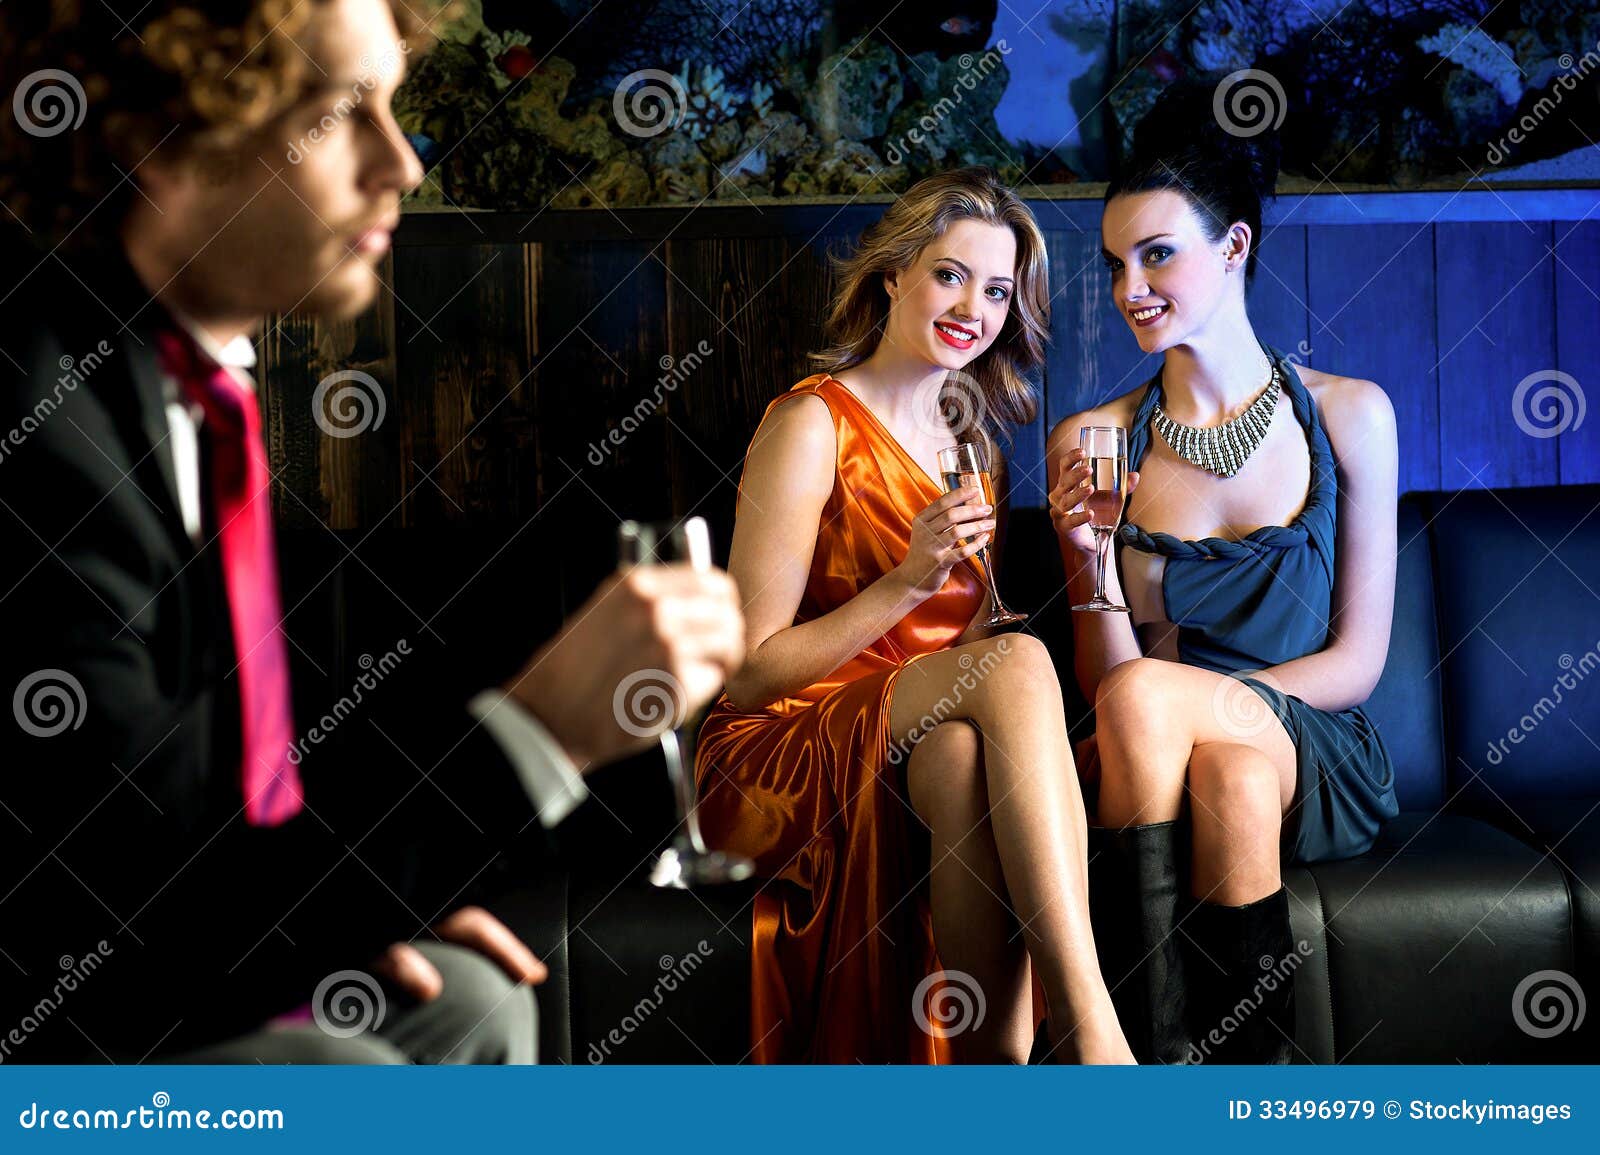 flirtatious young girls staring at handsome guy